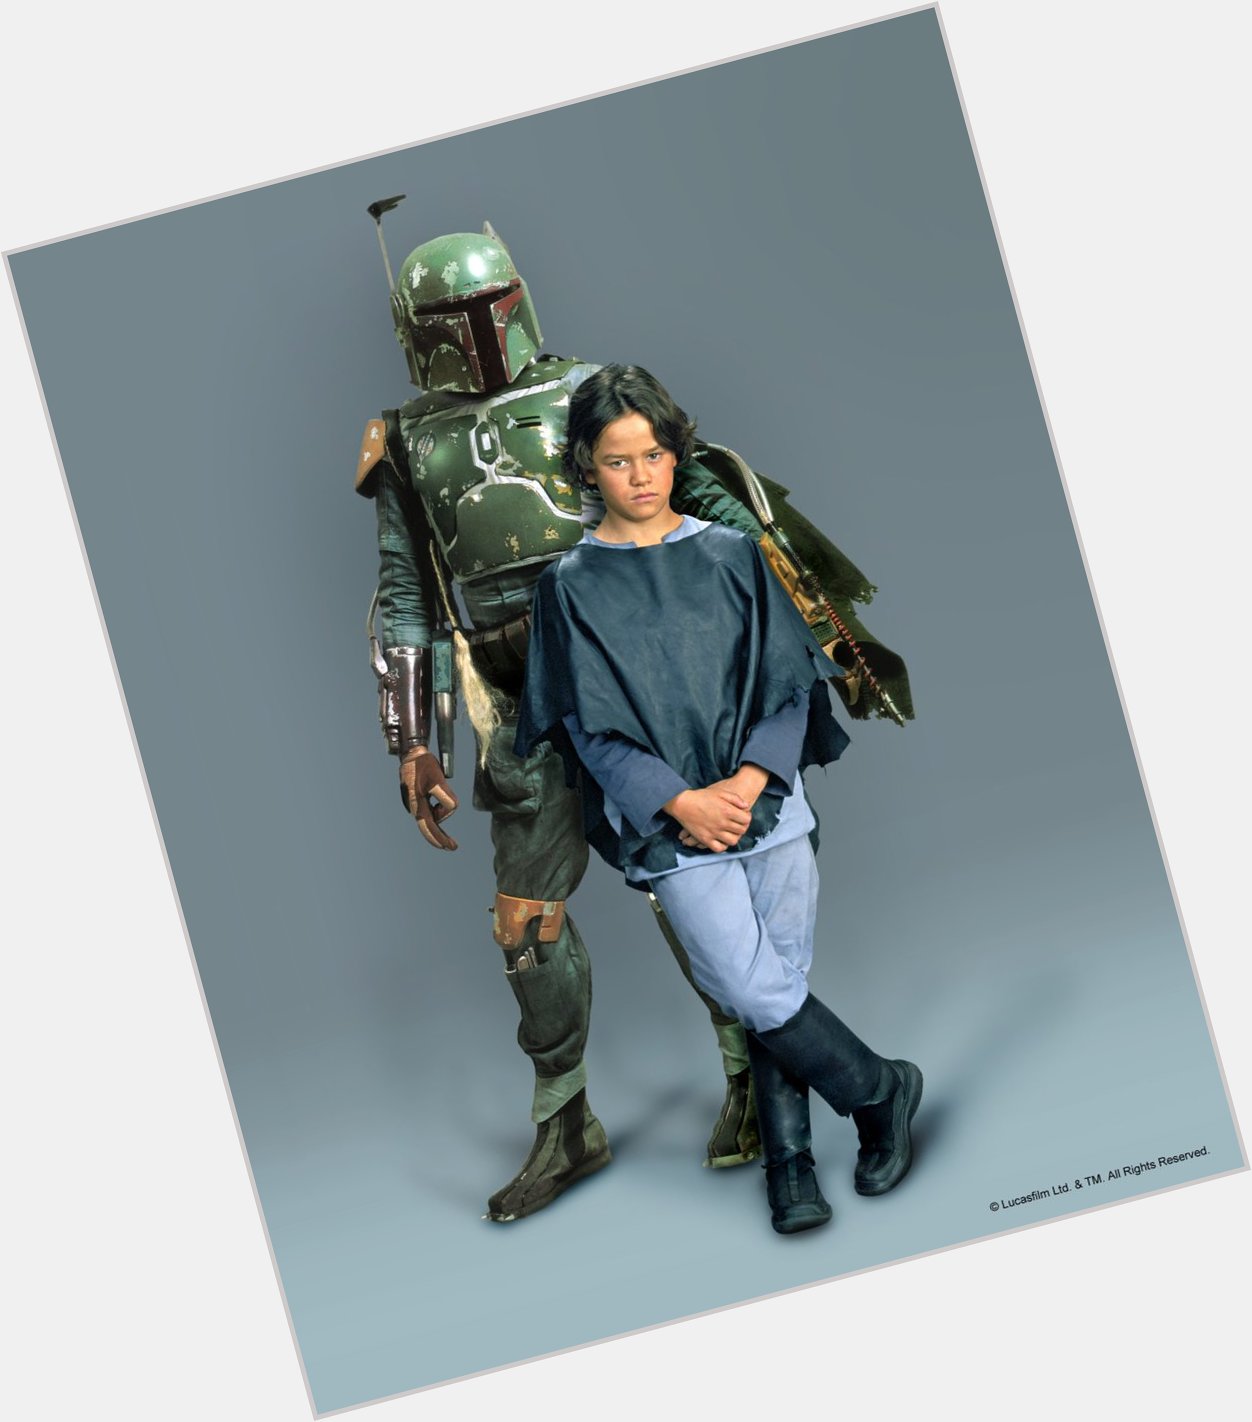  Happy Birthday, young Boba Fett! Still was awesome of you to come back in The Clone Wars TV series!   